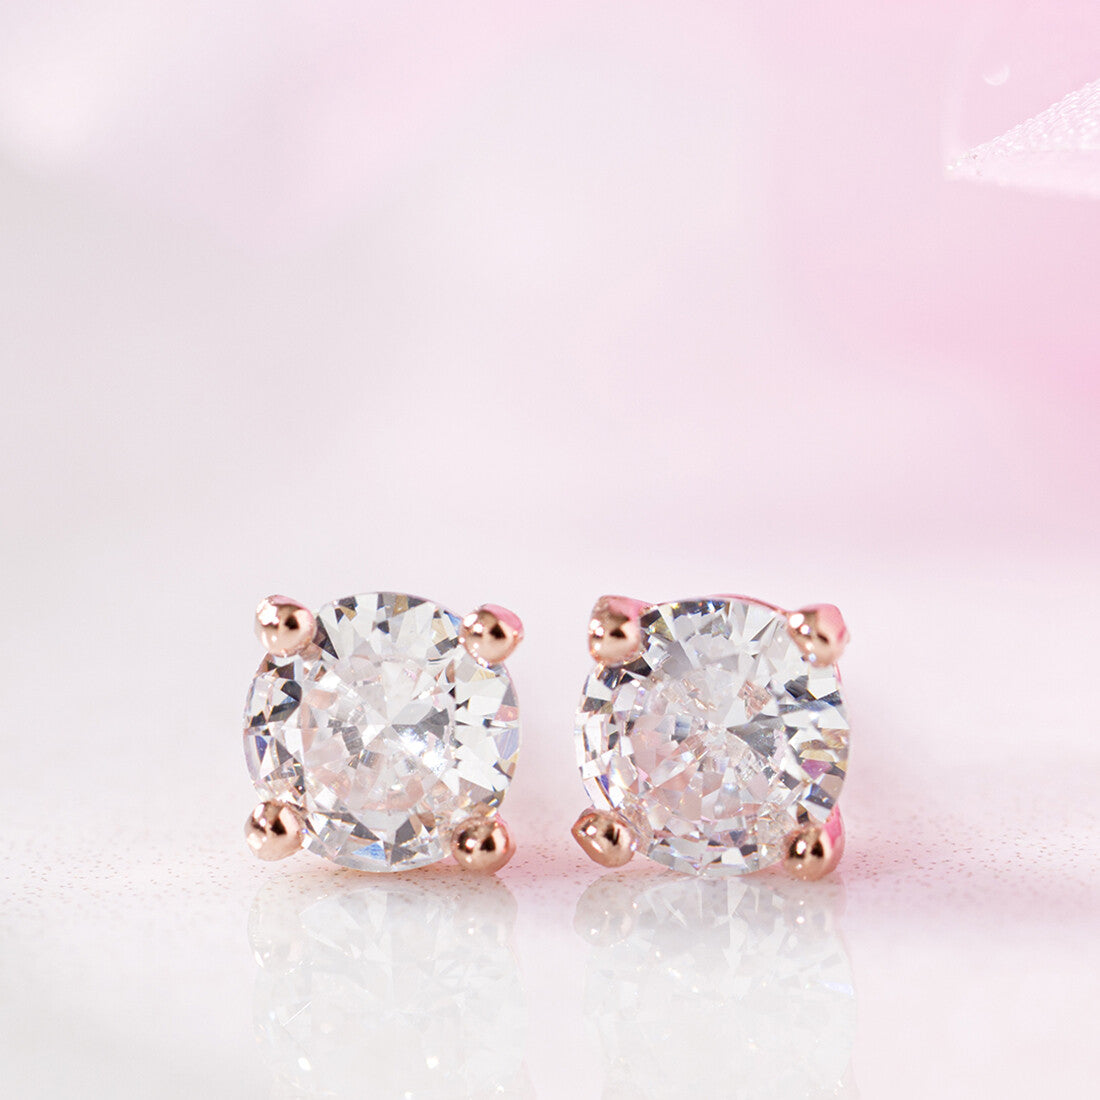 Sensational Solitaire 925 Silver Earrings In Rose Gold